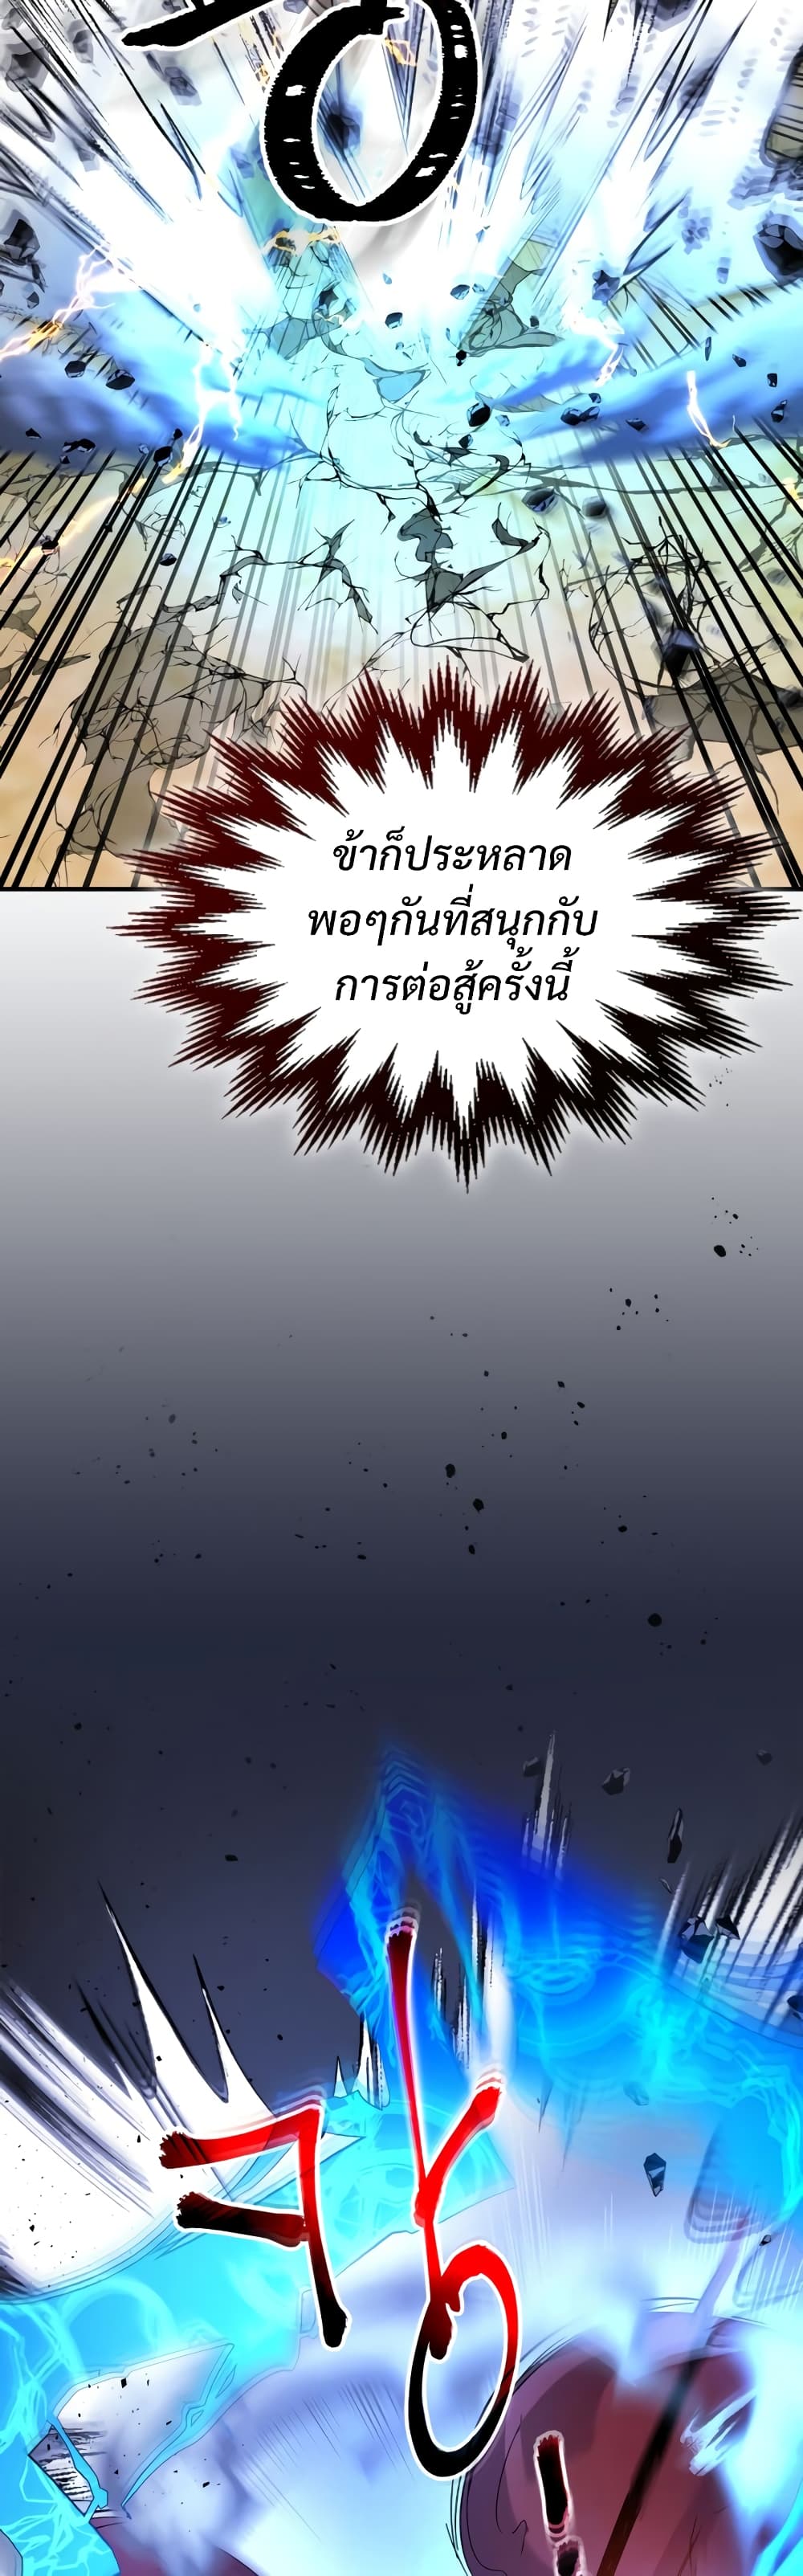 Leveling With The Gods 41 แปลไทย